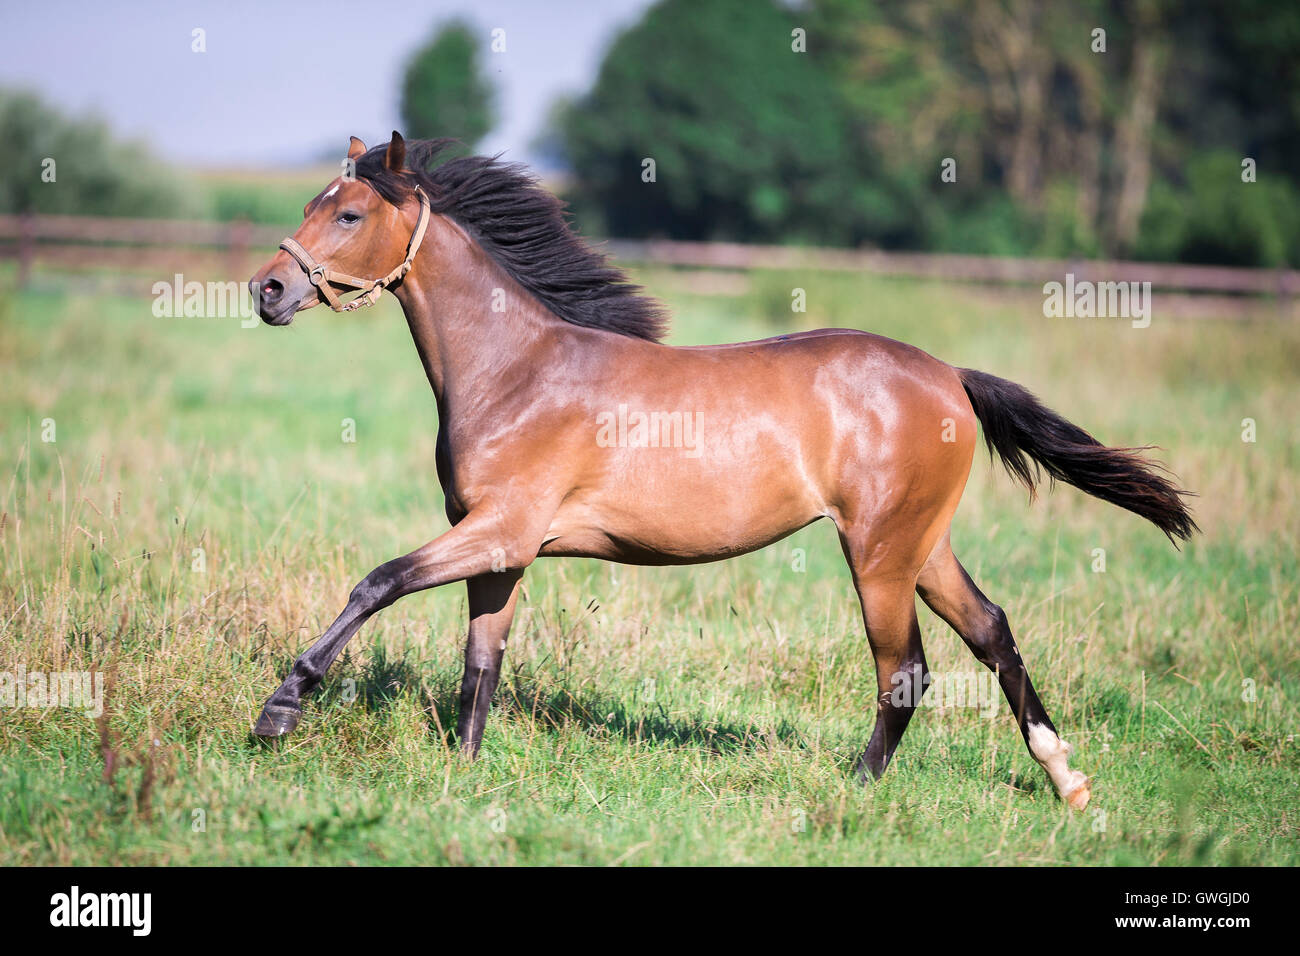 Bavarian Warmblood. Yearling mare galloping on a pasture. Germany Stock Photo